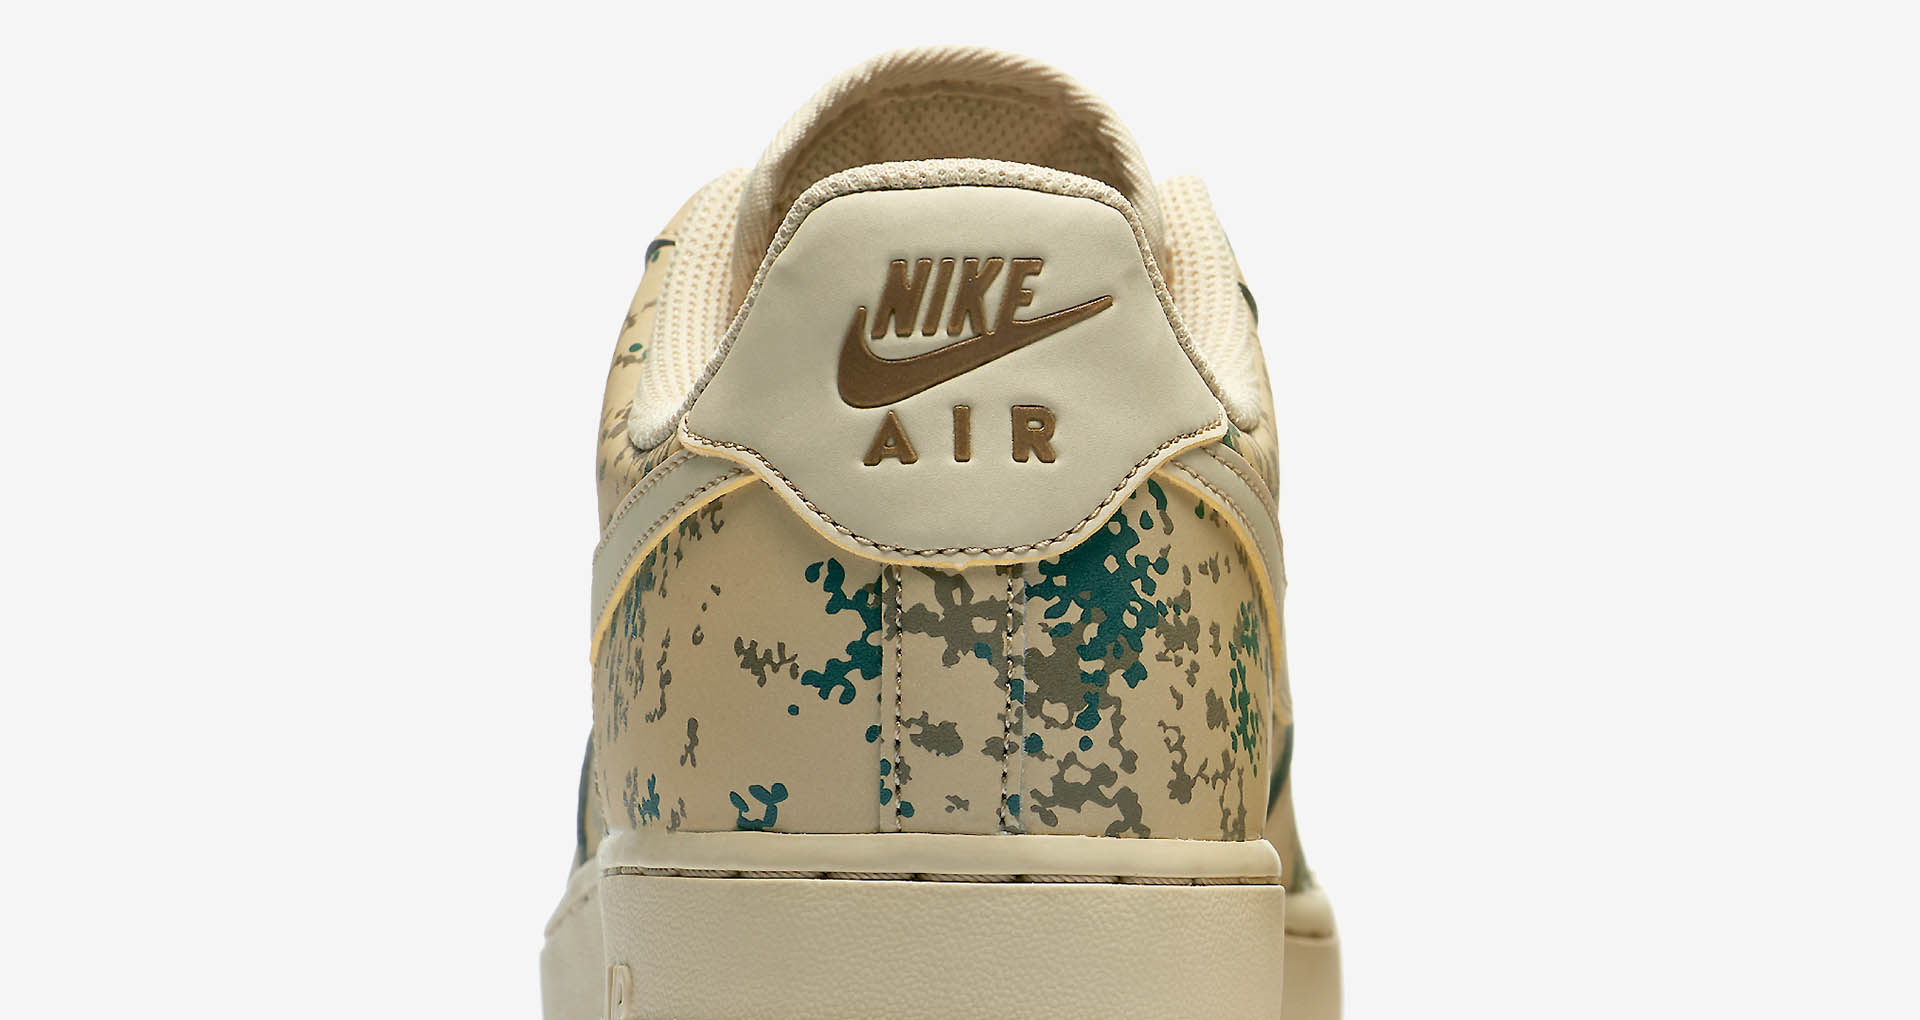 14-nike-air-force-1-low-lv8-beige-camo-823511-700